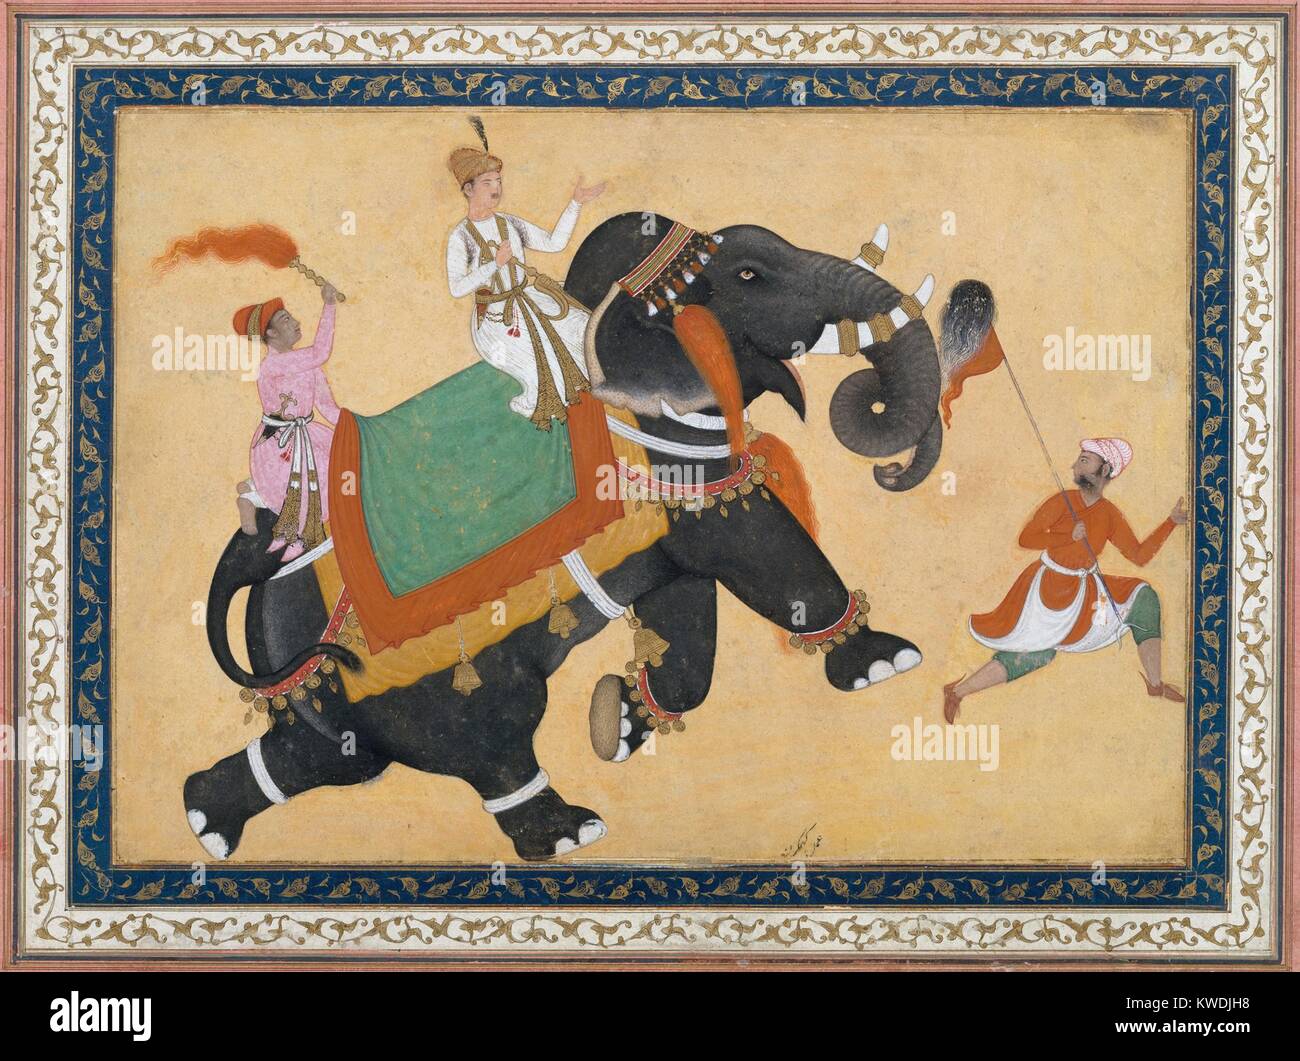 PRINCE RIDING AN ELEPHANT, by Khem Karan, 16th-17th c., Indian, Mughal watercolor painting. Elephants were prized and often the subject of Mughal artworks. The artist worked in the court of Akbar the Great, the third Mughal emperor, who reigned from 1556 to 1605 (BSLOC 2017 16 27) Stock Photo